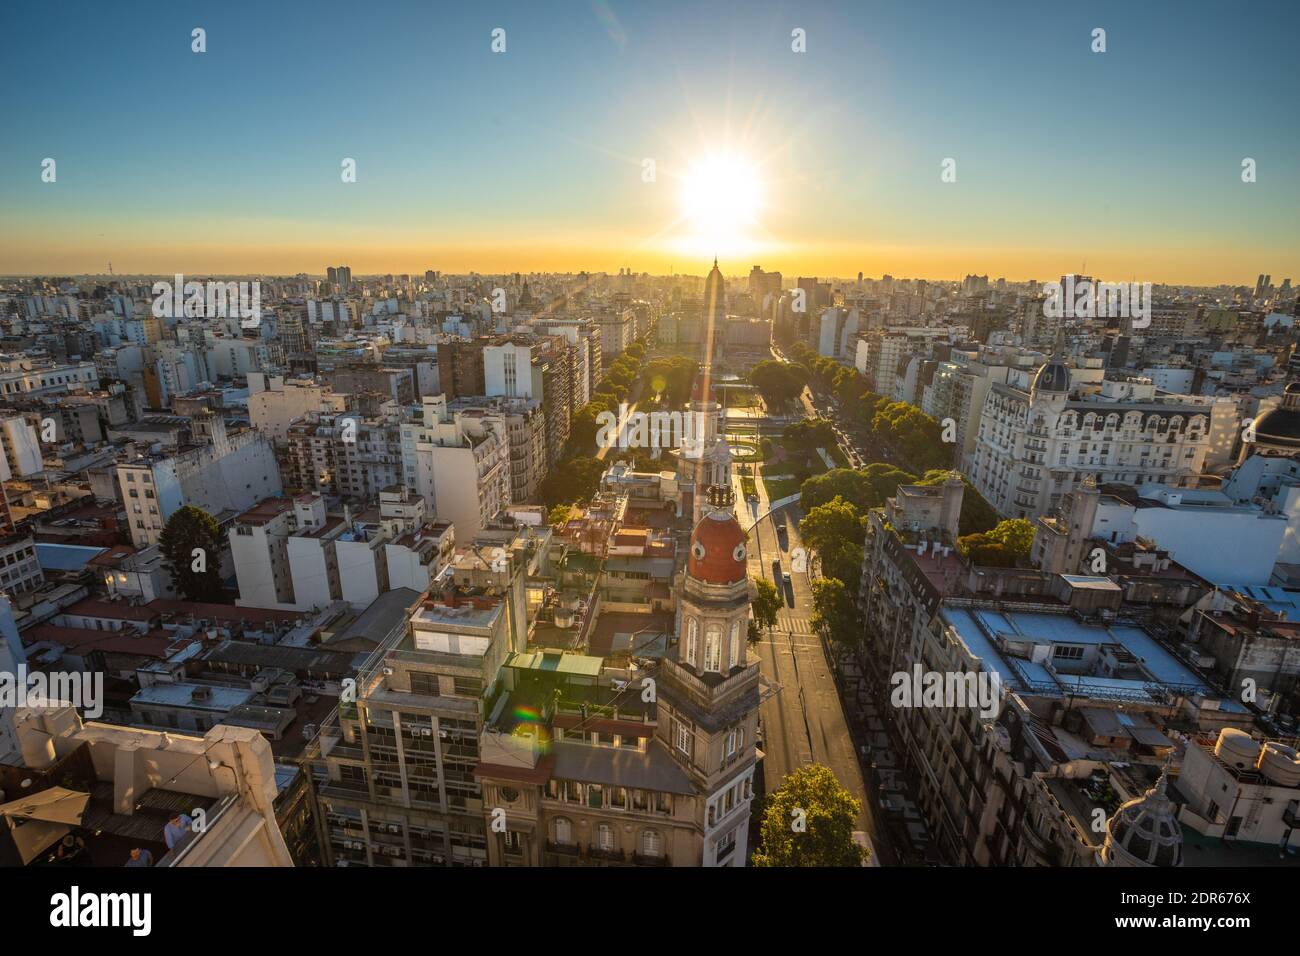 Nice sunset view of Buenos Aires Argentina Stock Photo